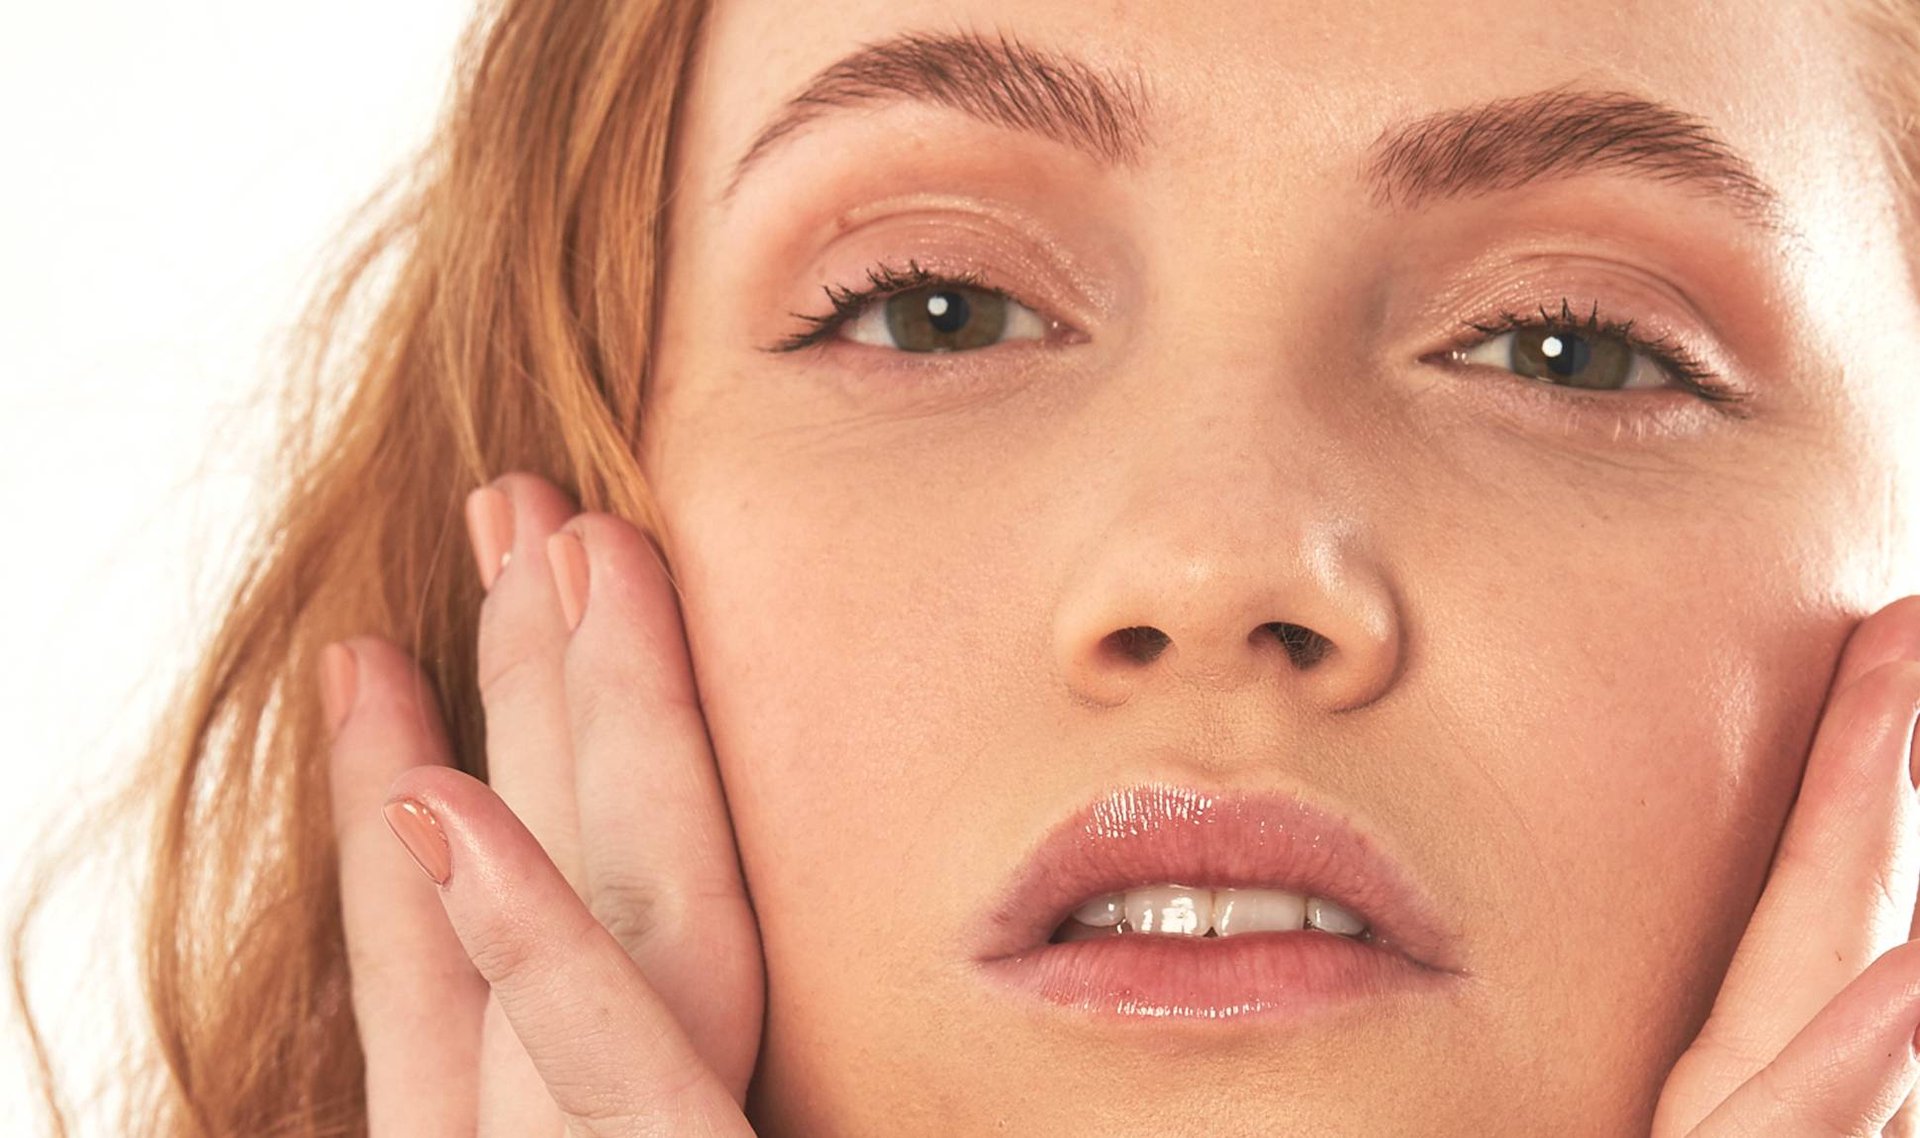 Skin Discoloration 101: What Is Melasma?